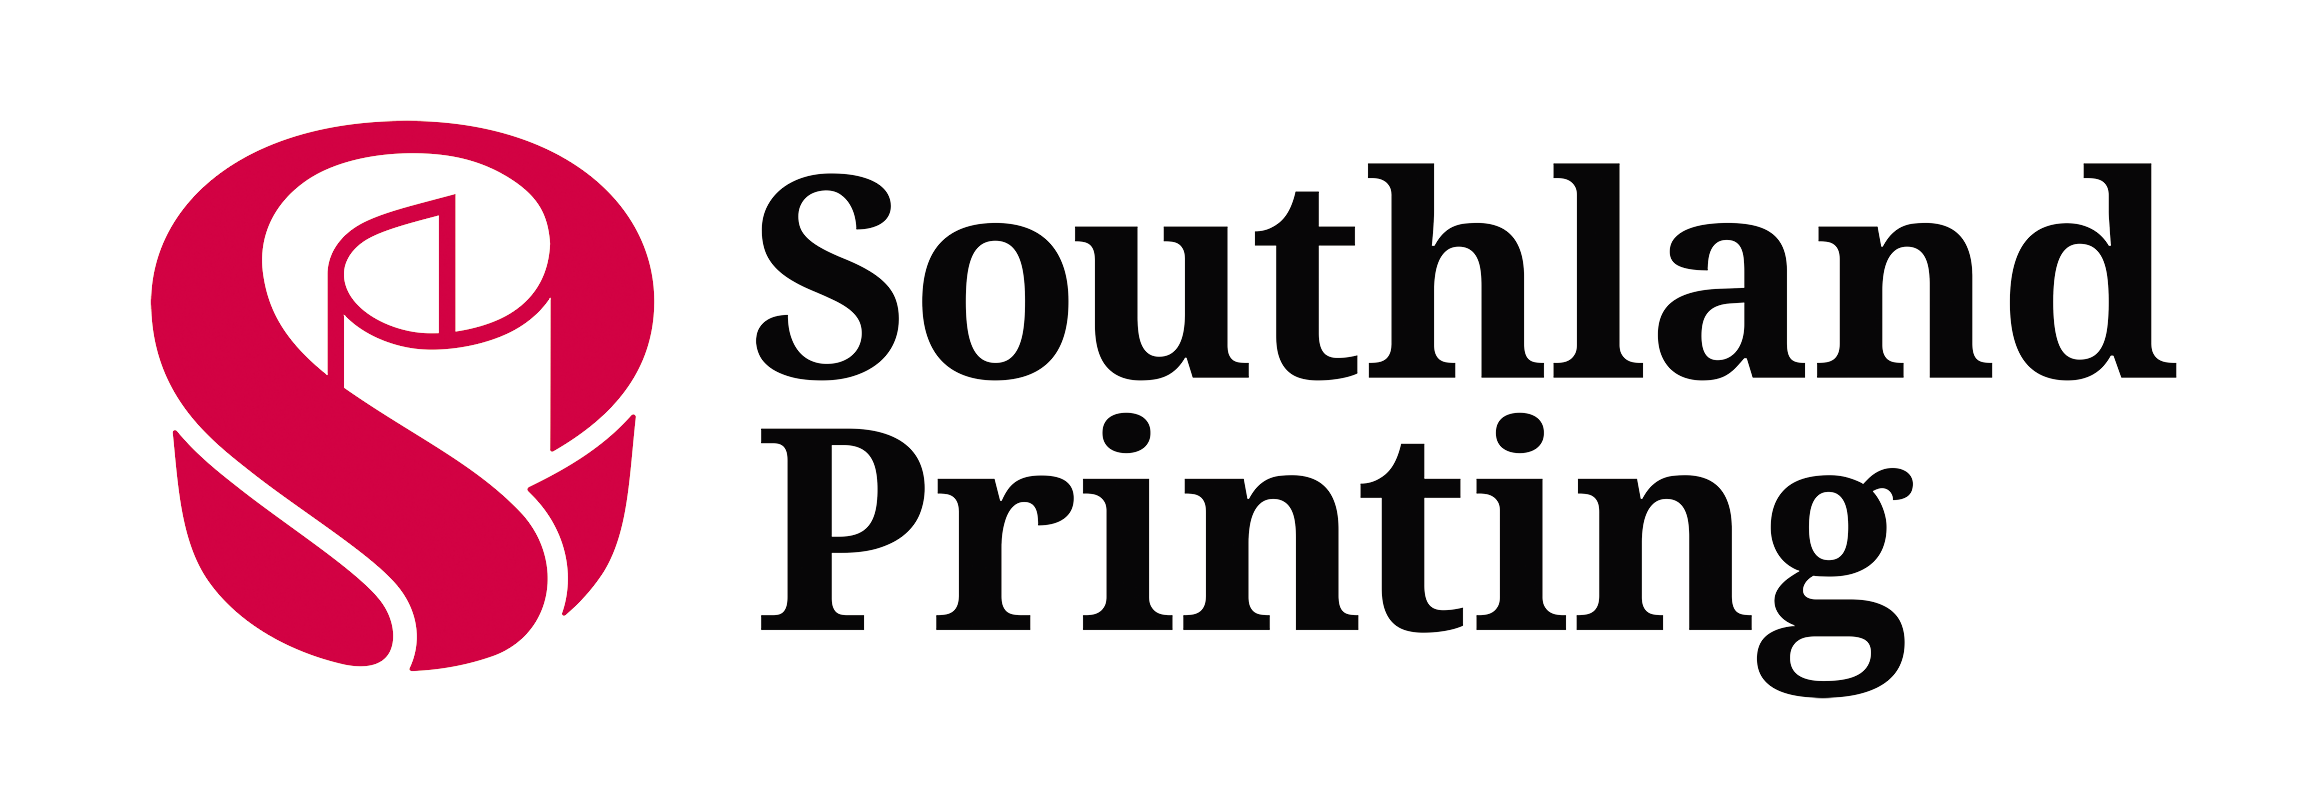 southland_logo_horizontal__USE-ONLY-ON-WHITE__c10-m100-y70-k0(1).png